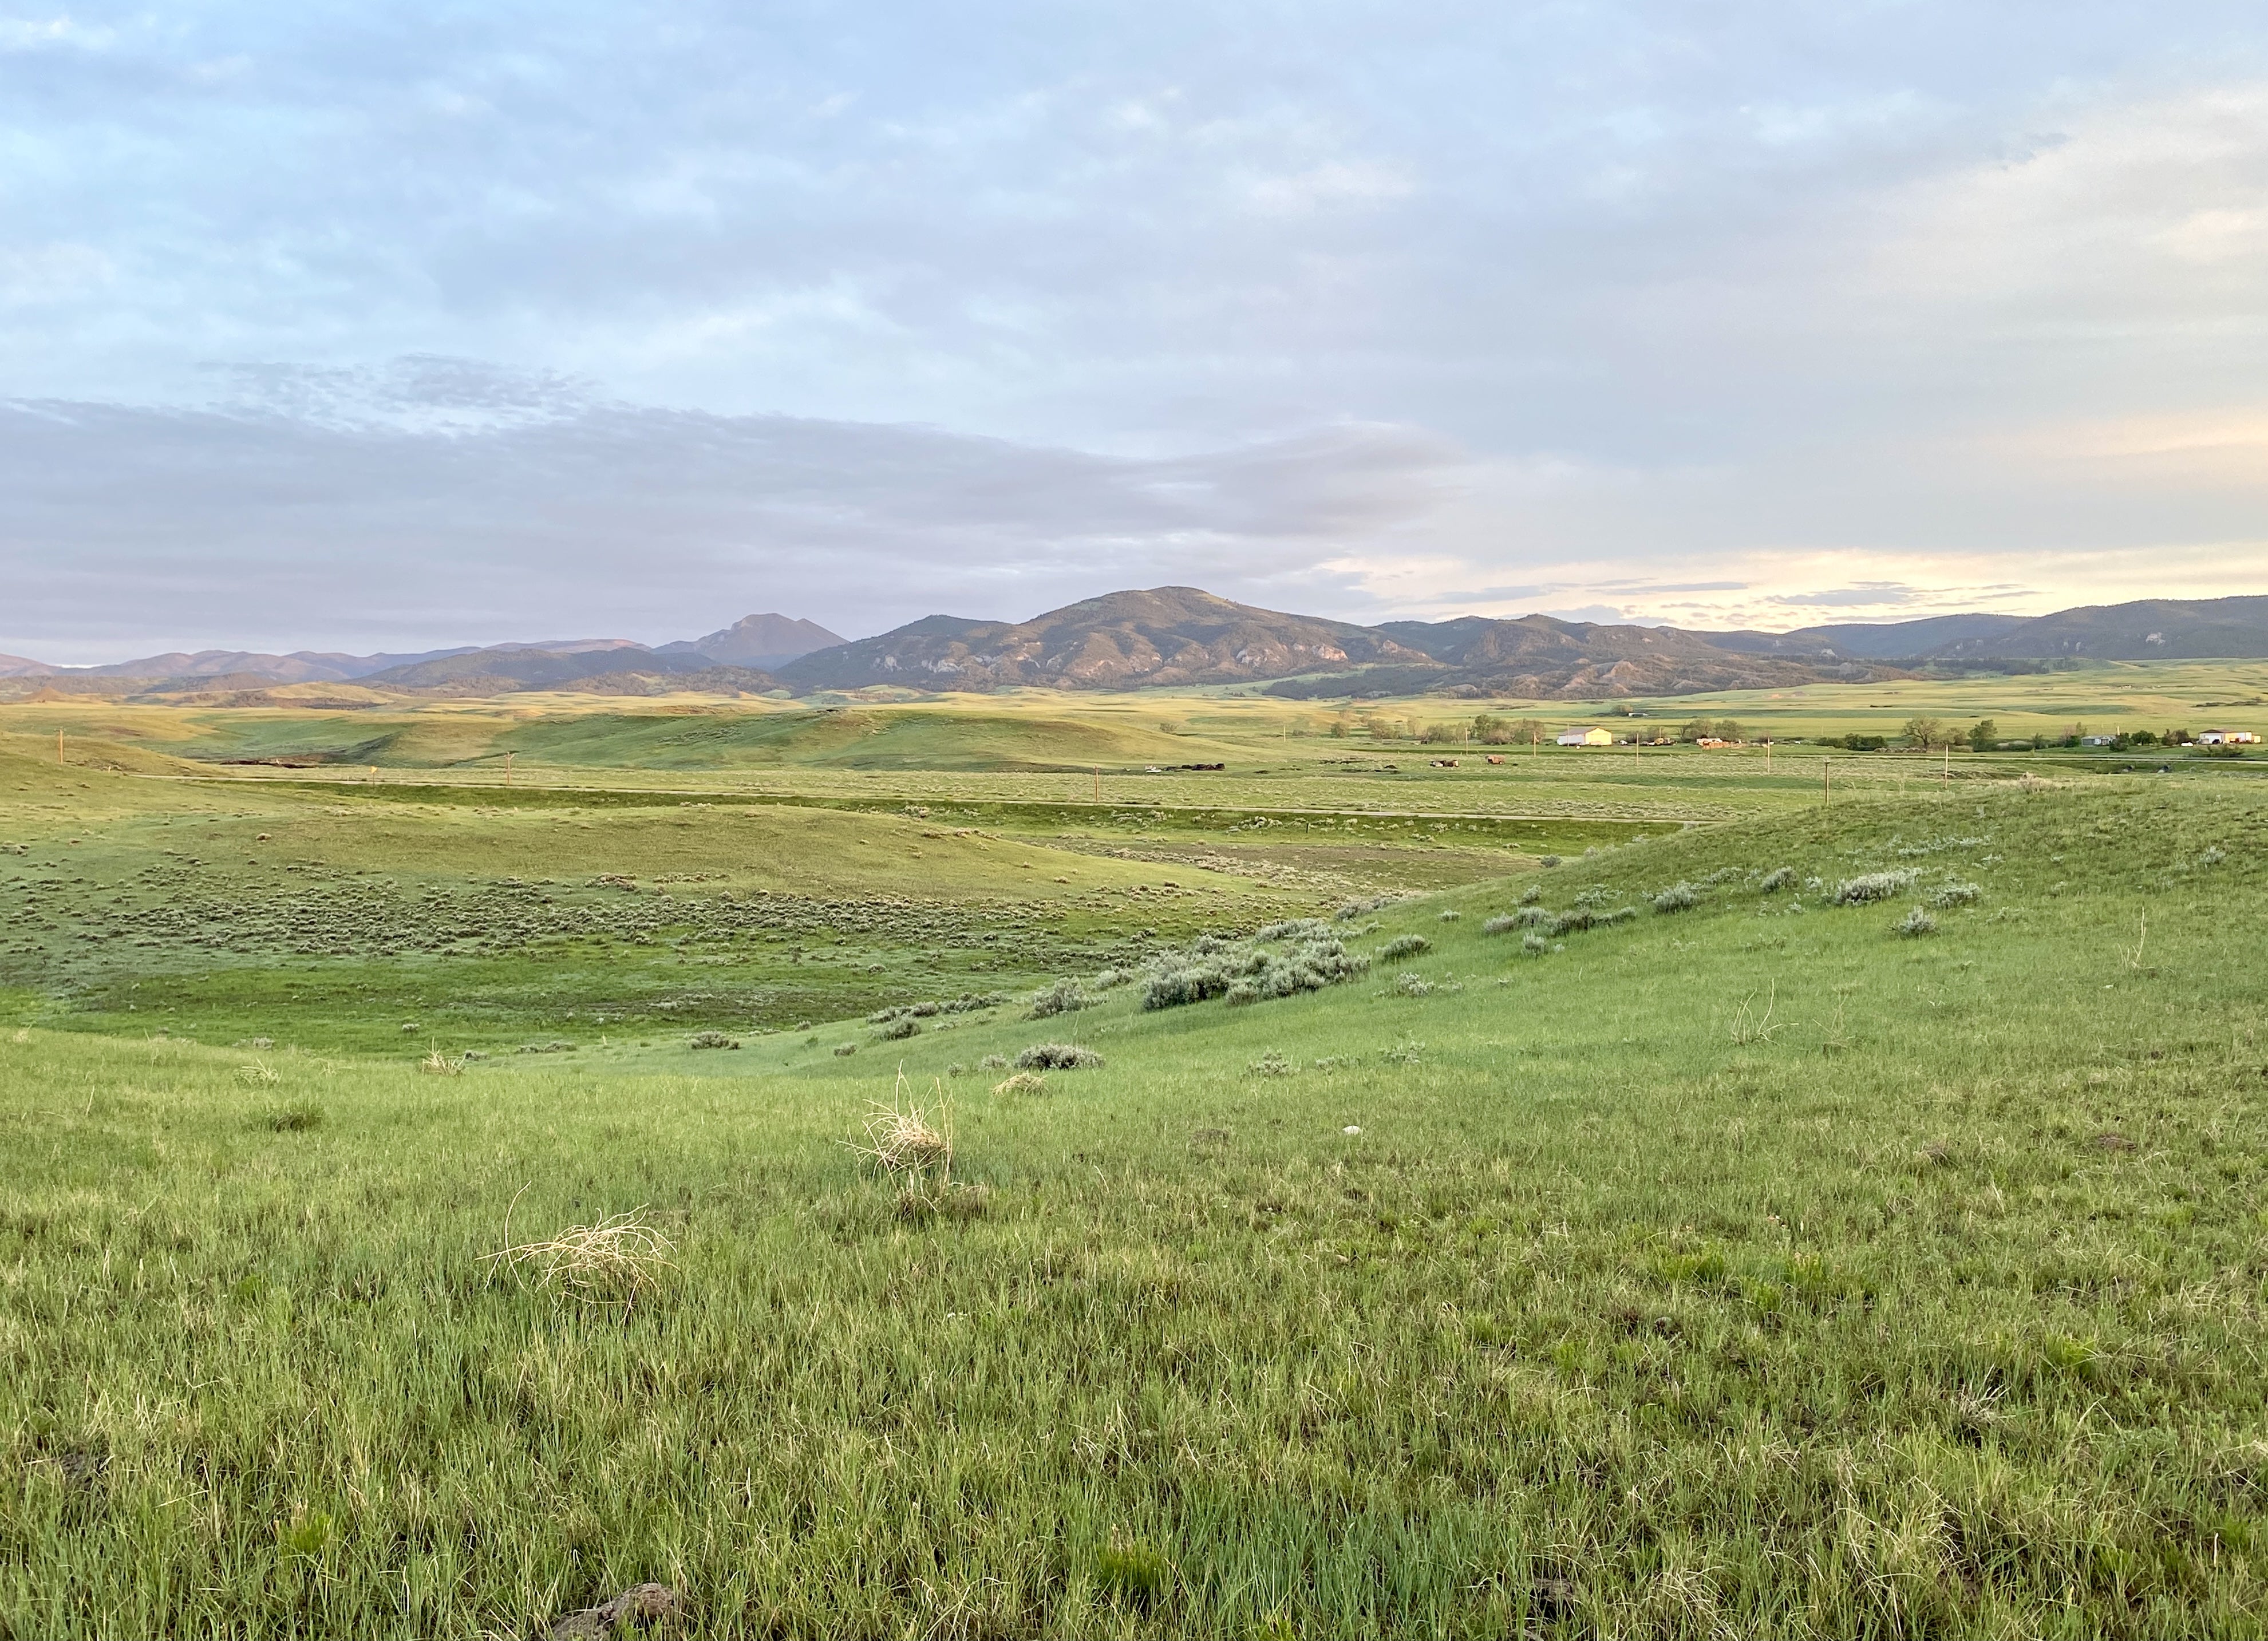 image shows an expansive view of lush grassy hills with sagebrush shrubs. Far in the distance are rolling mountains that are reflecting purplish pink in the morning light